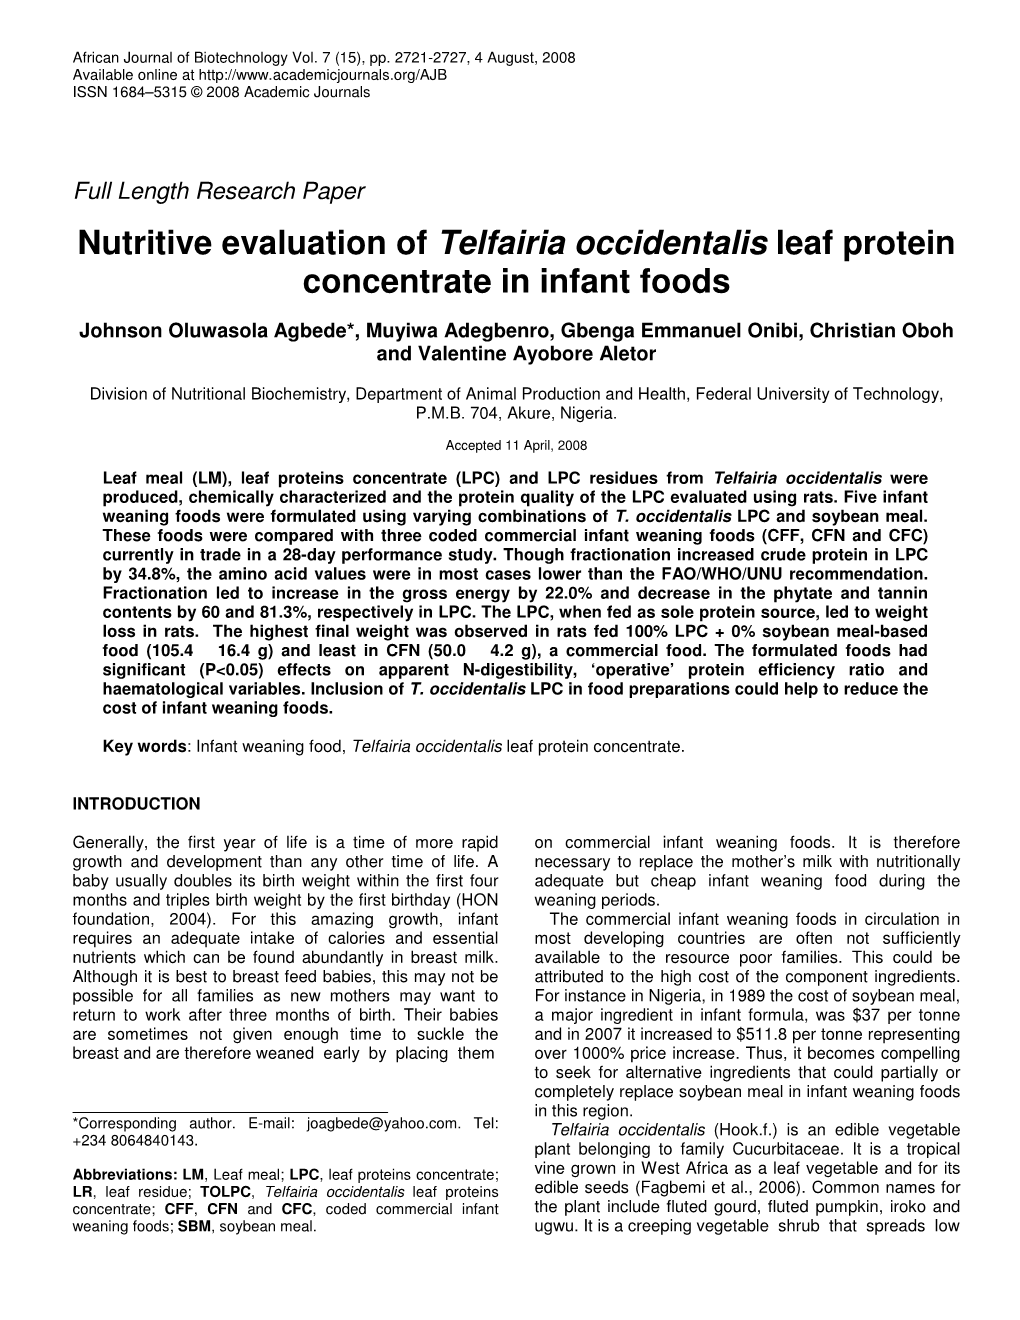 Nutritive Evaluation of Telfairia Occidentalis Leaf Protein Concentrate in Infant Foods